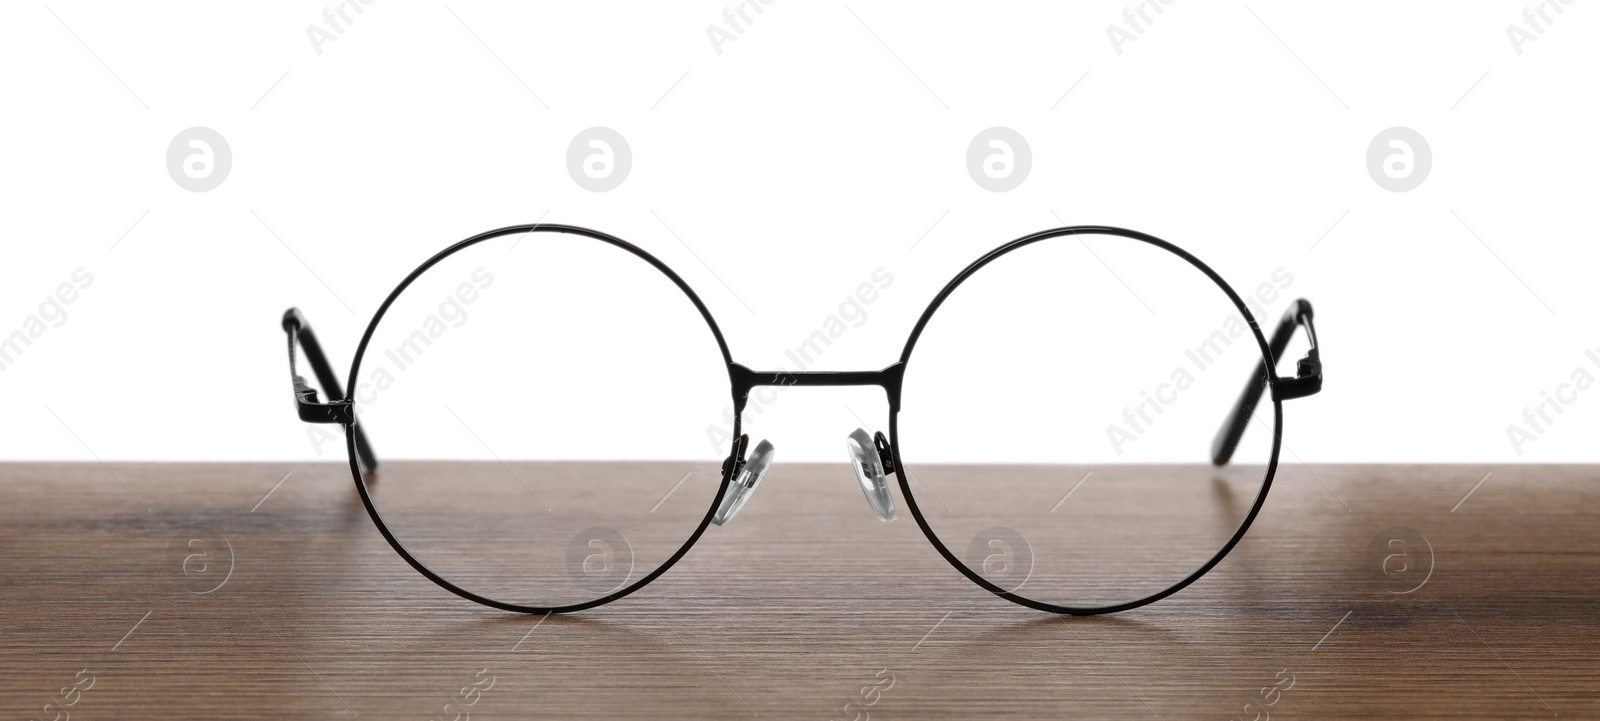 Photo of Round glasses with metal frame on wooden table against white background